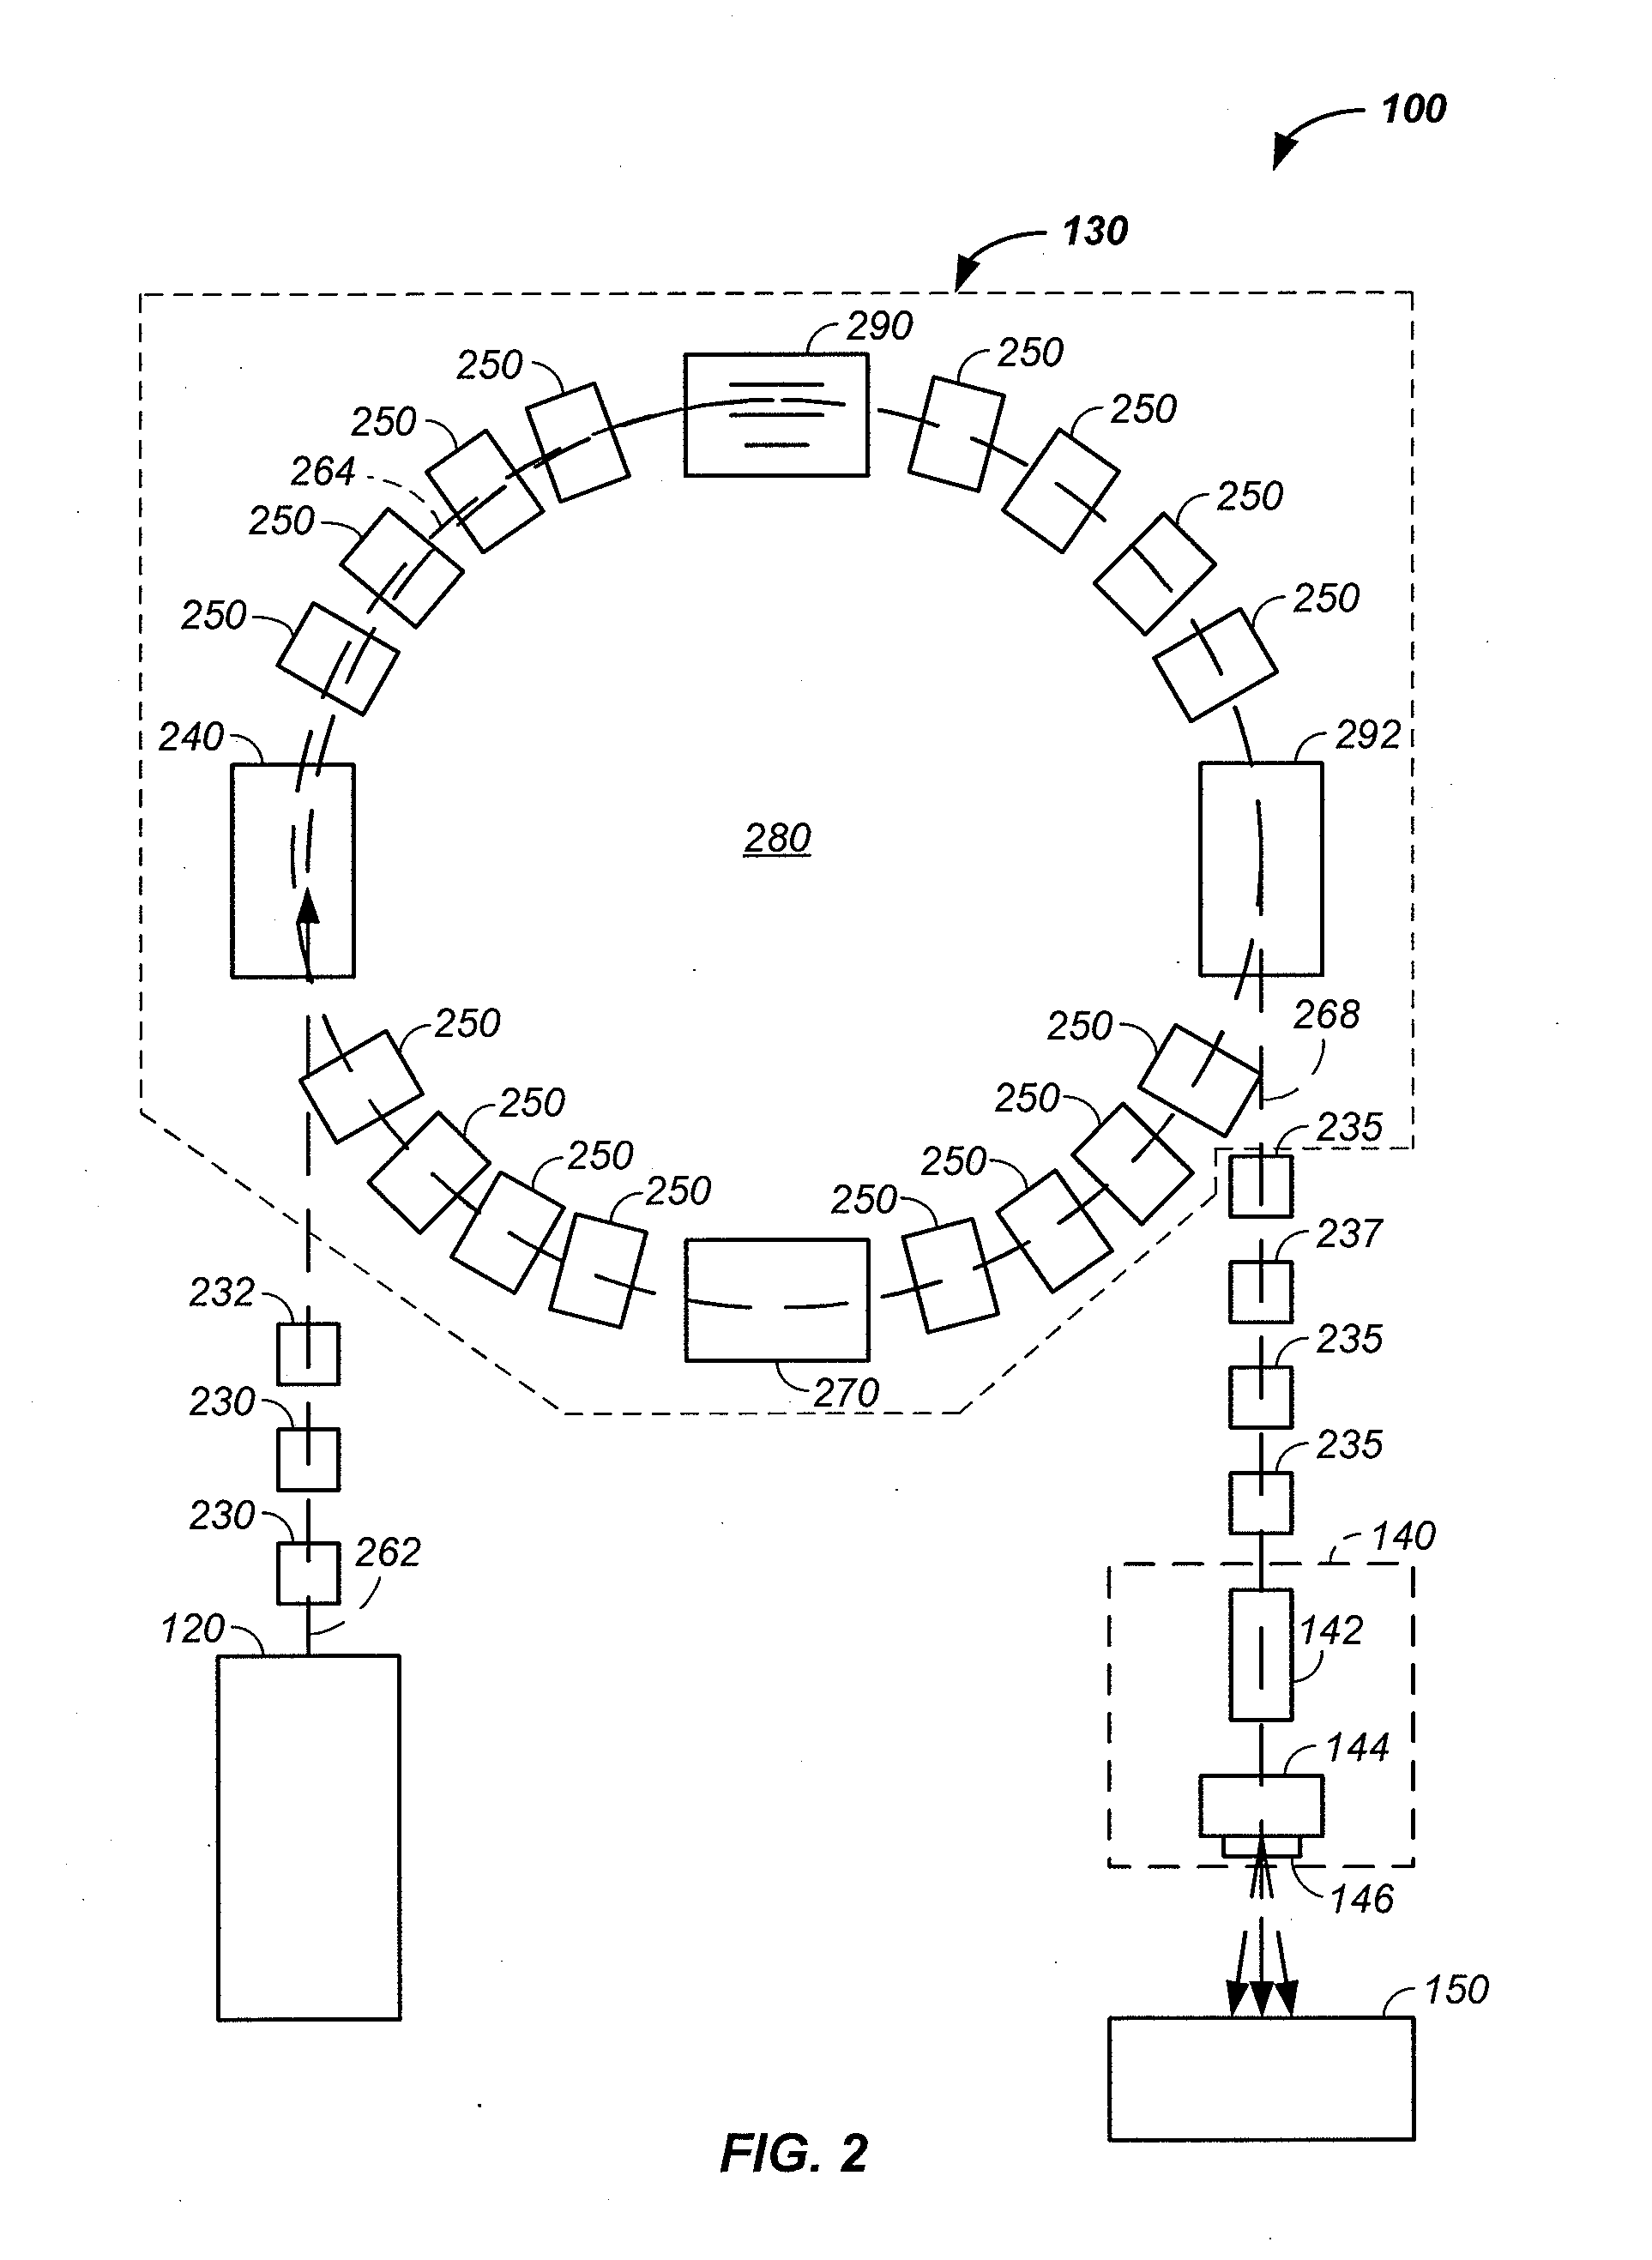 X-ray method and apparatus used in conjunction with a charged particle cancer therapy system